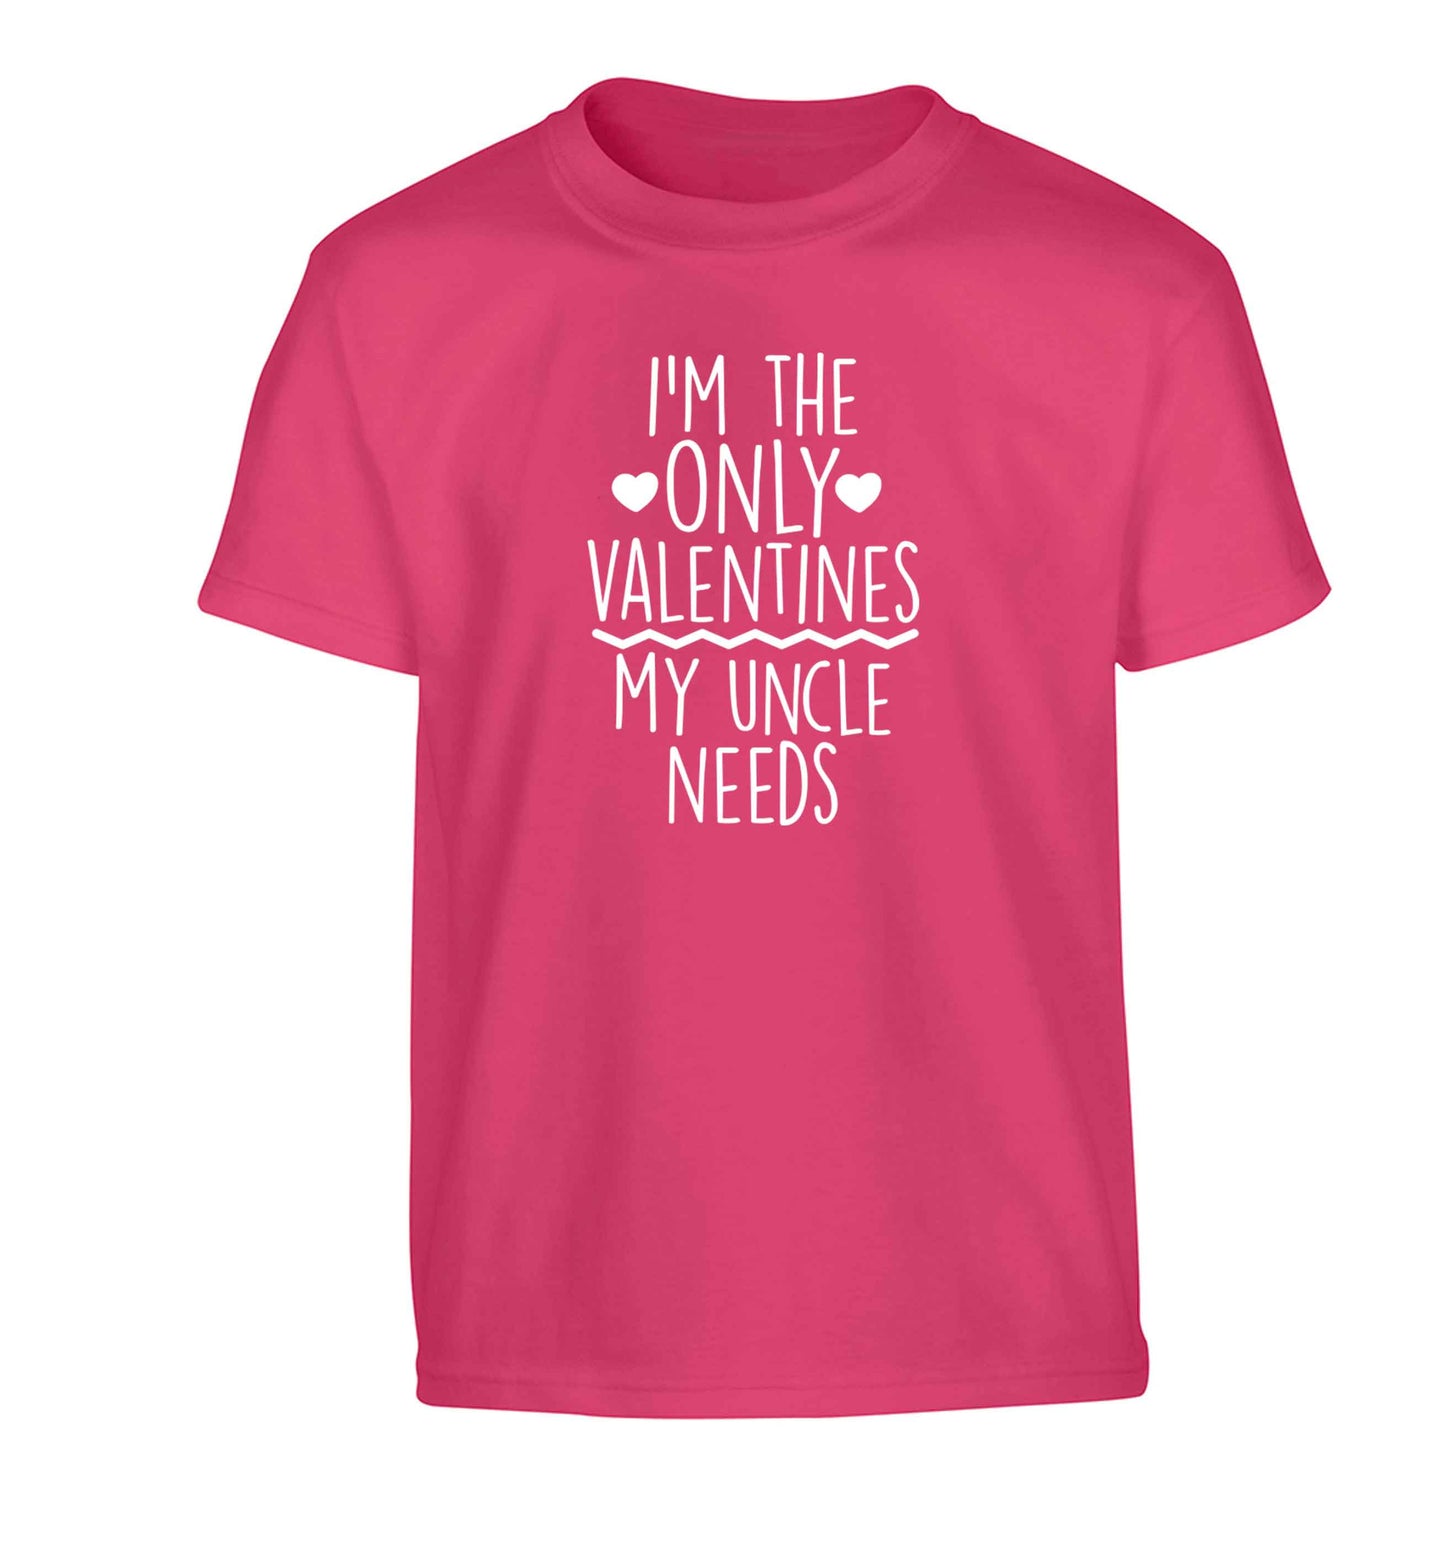 I'm the only valentines my uncle needs Children's pink Tshirt 12-13 Years